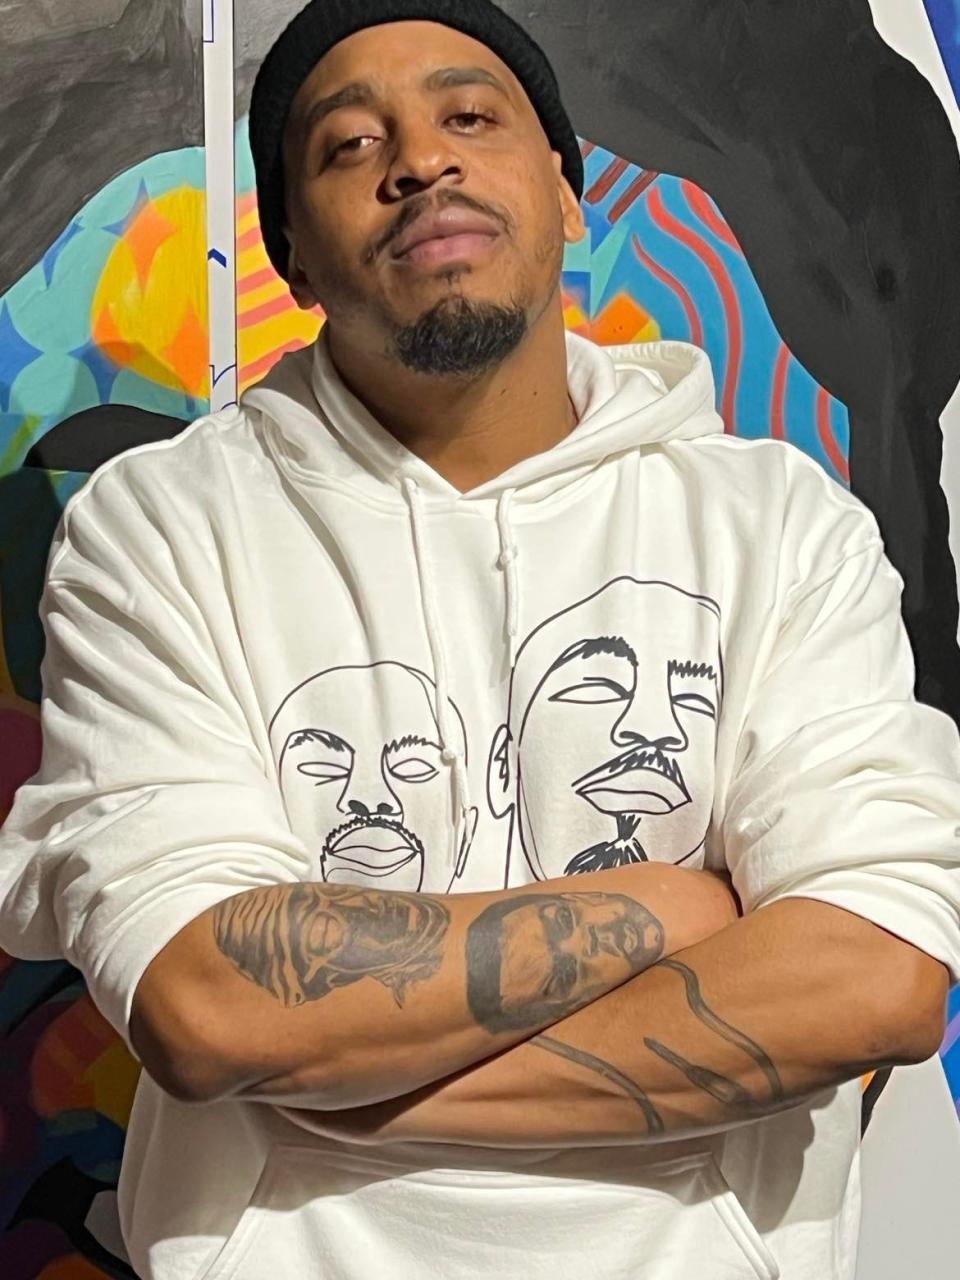 Jéan P the MC, whose name is Jéan Pierre Johnson, is a Canton area-based rapper and hip-hop artist. Jéan P released a new album last year and also hosts a podcast about music, culture and art.